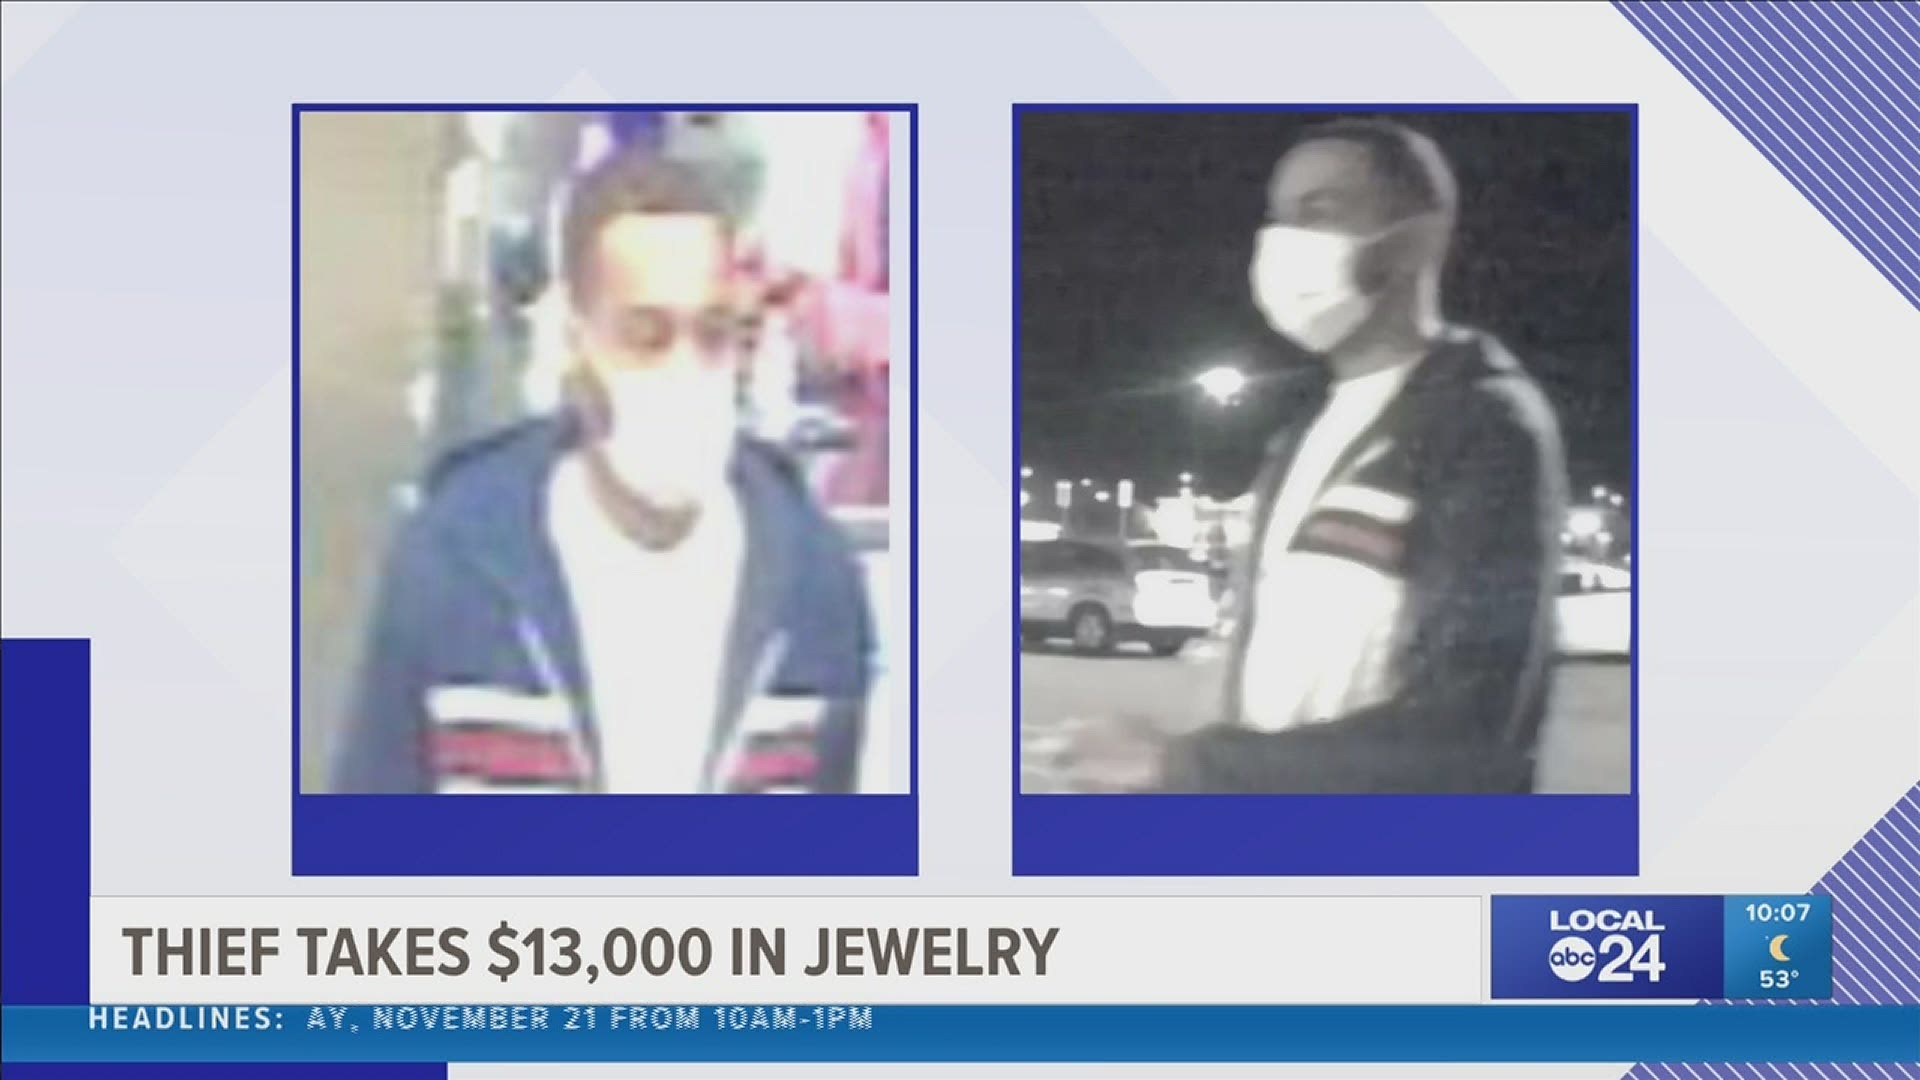 You could earn a cash reward for information leading to the suspect’s arrest